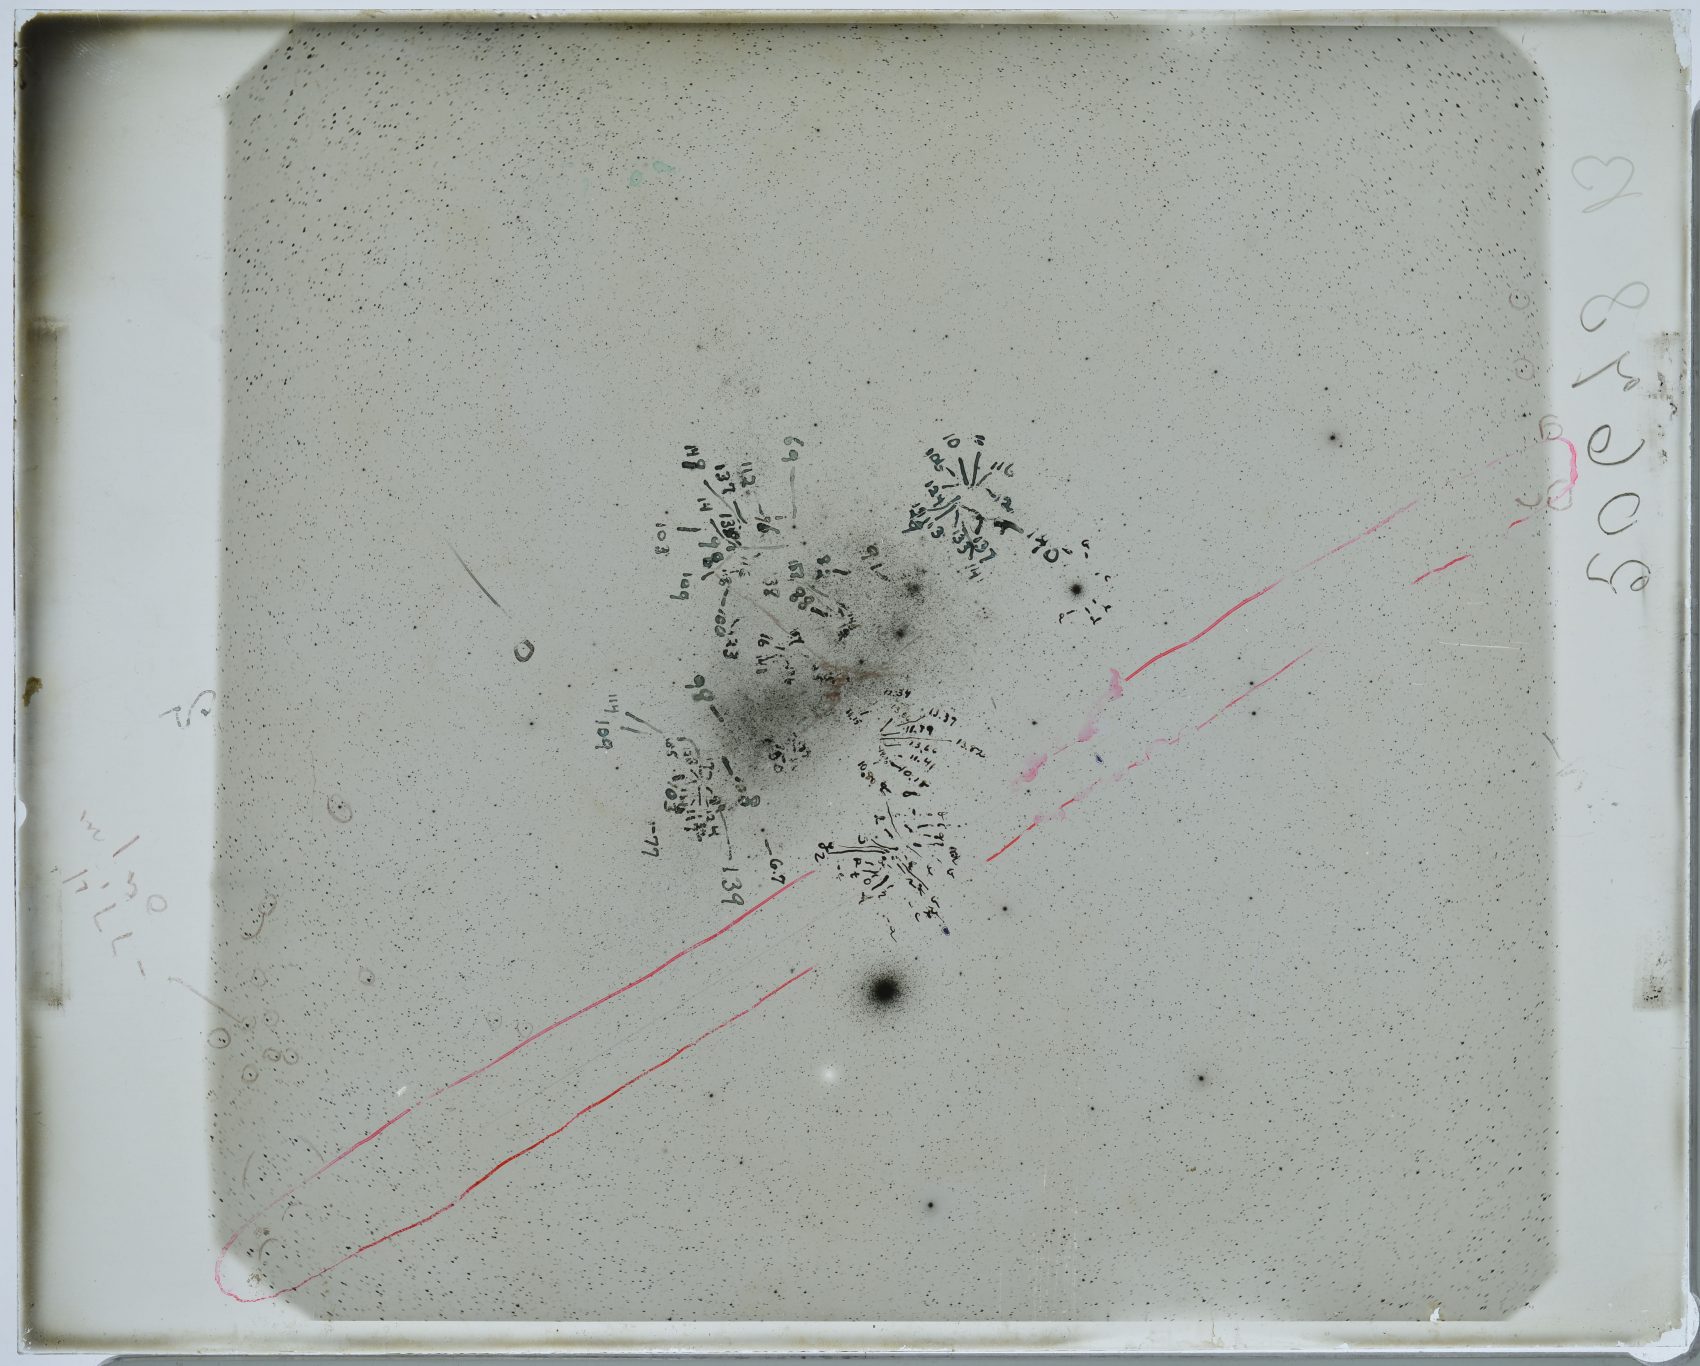 It's believed that Plate B20678 is the plate Henrietta Leavitt used to study variable stars in the Small Magellanic Cloud. (Courtesy Lindsay Smith)